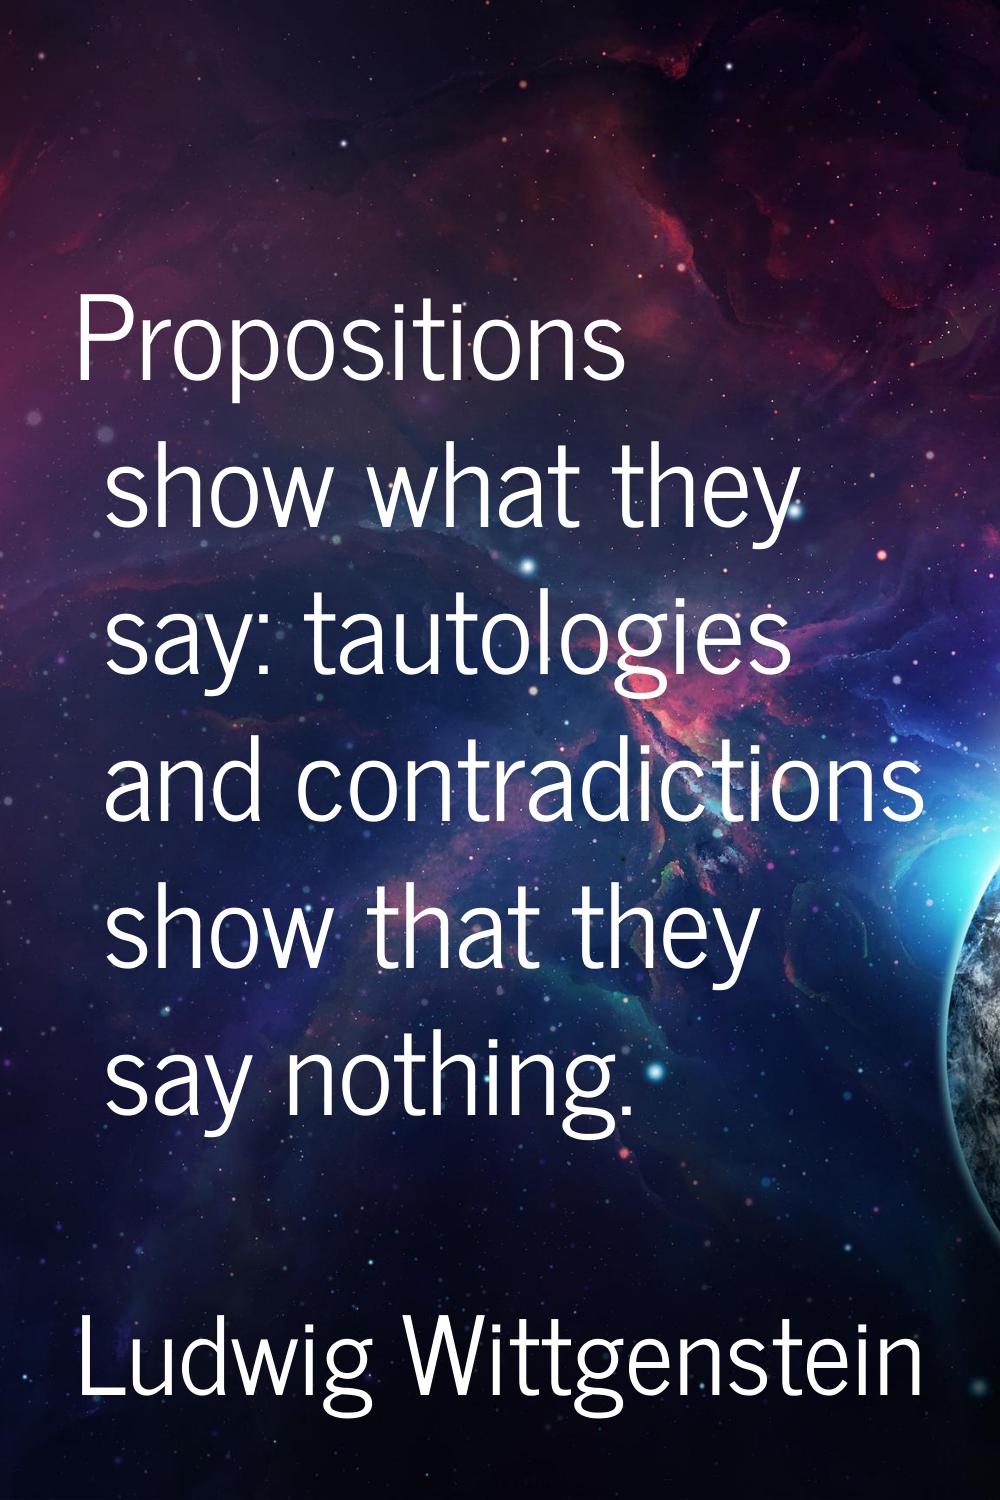 Propositions show what they say: tautologies and contradictions show that they say nothing.